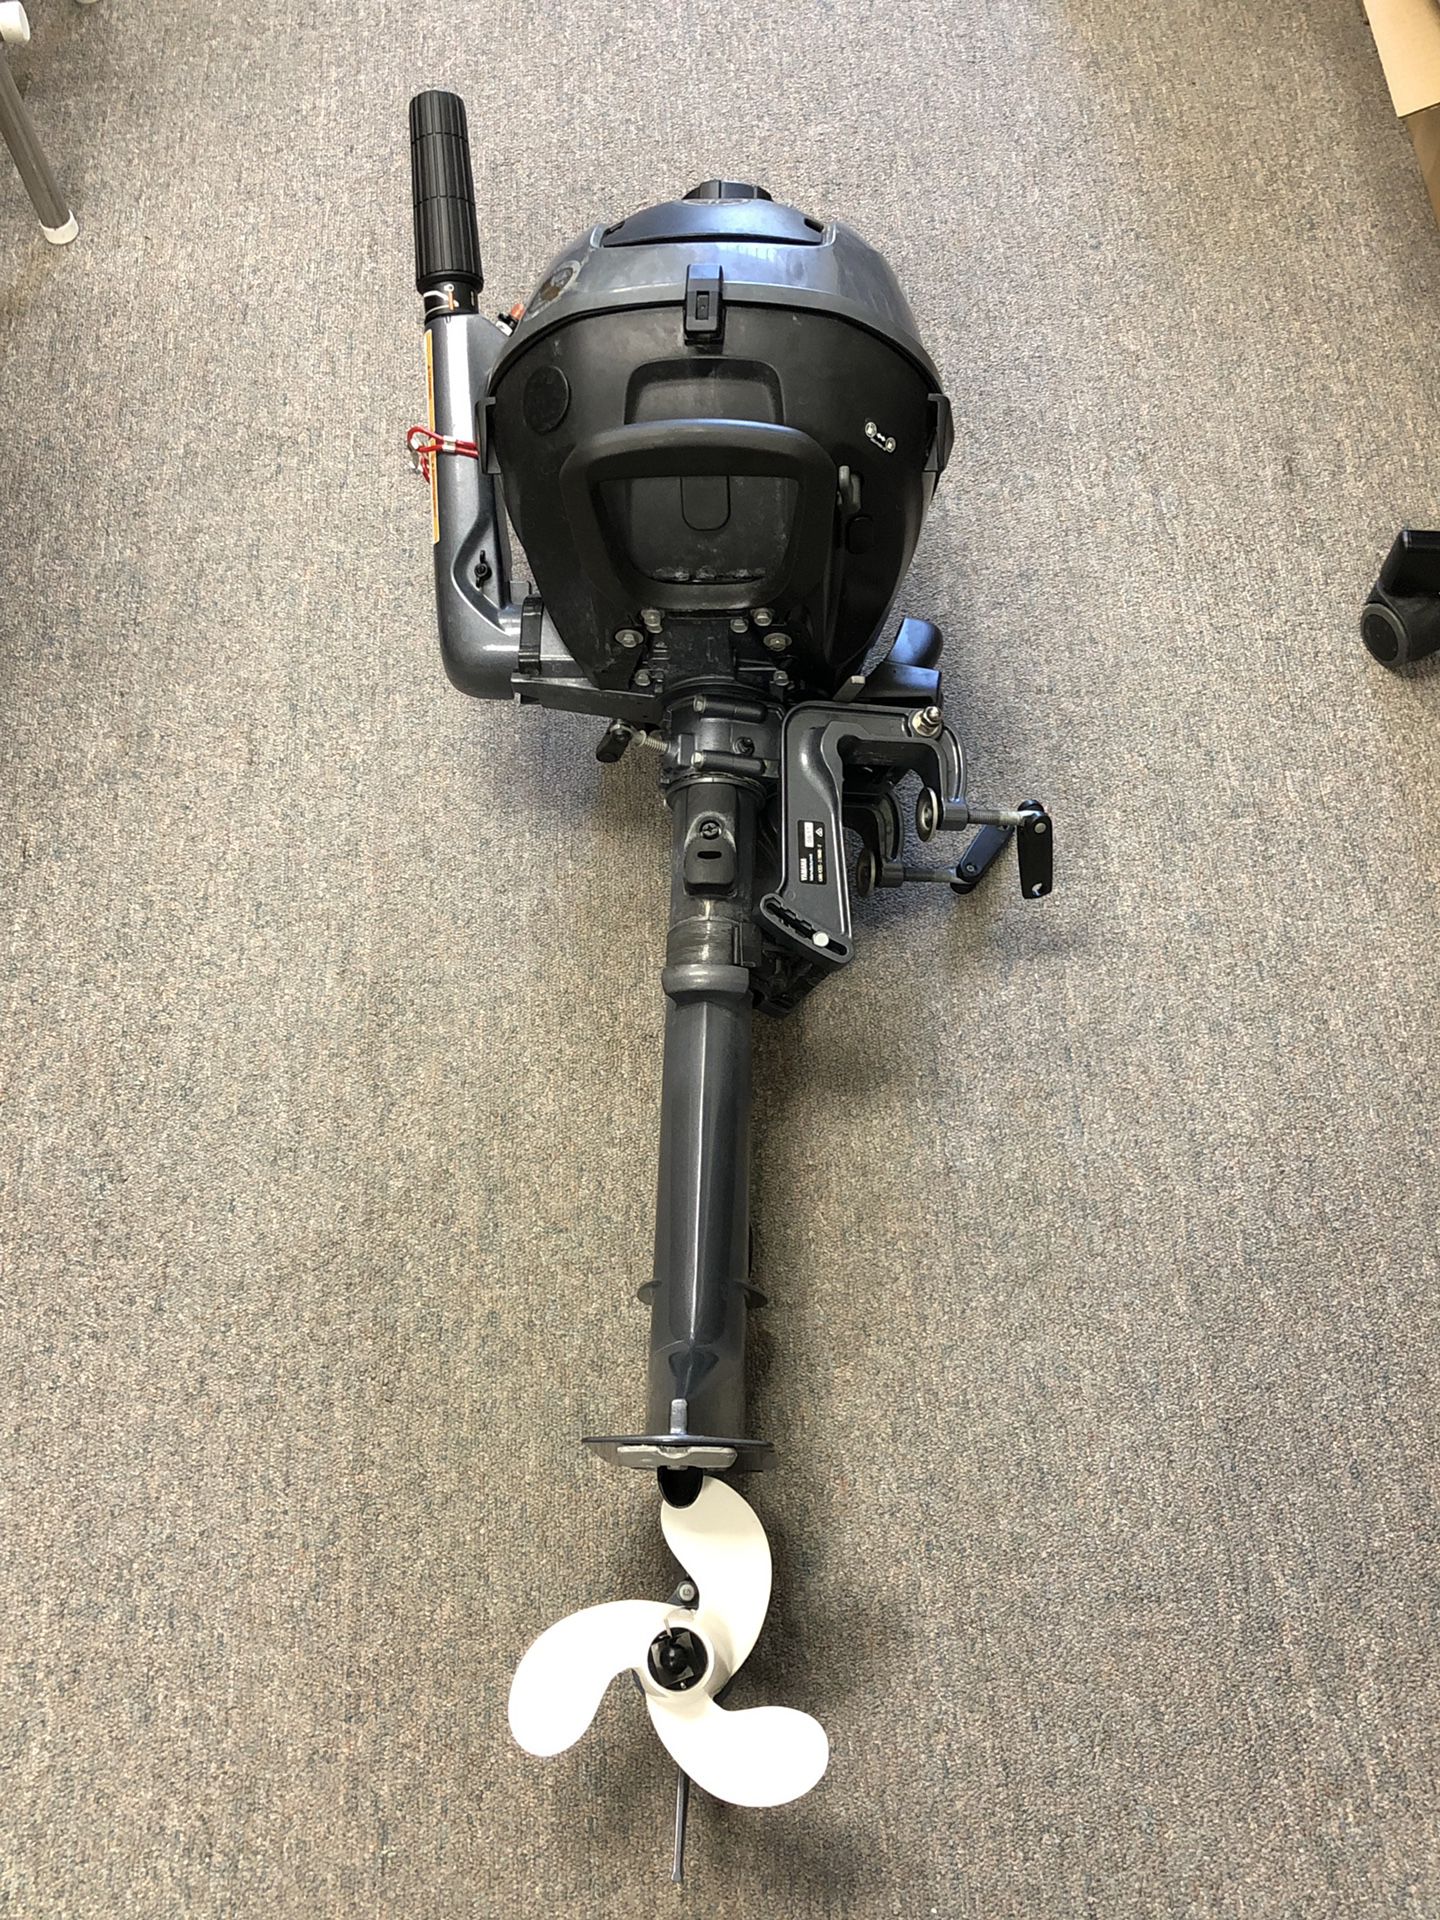 Yamaha 2.5 Hp 4 stroke outboard motor used less than 5 hours.